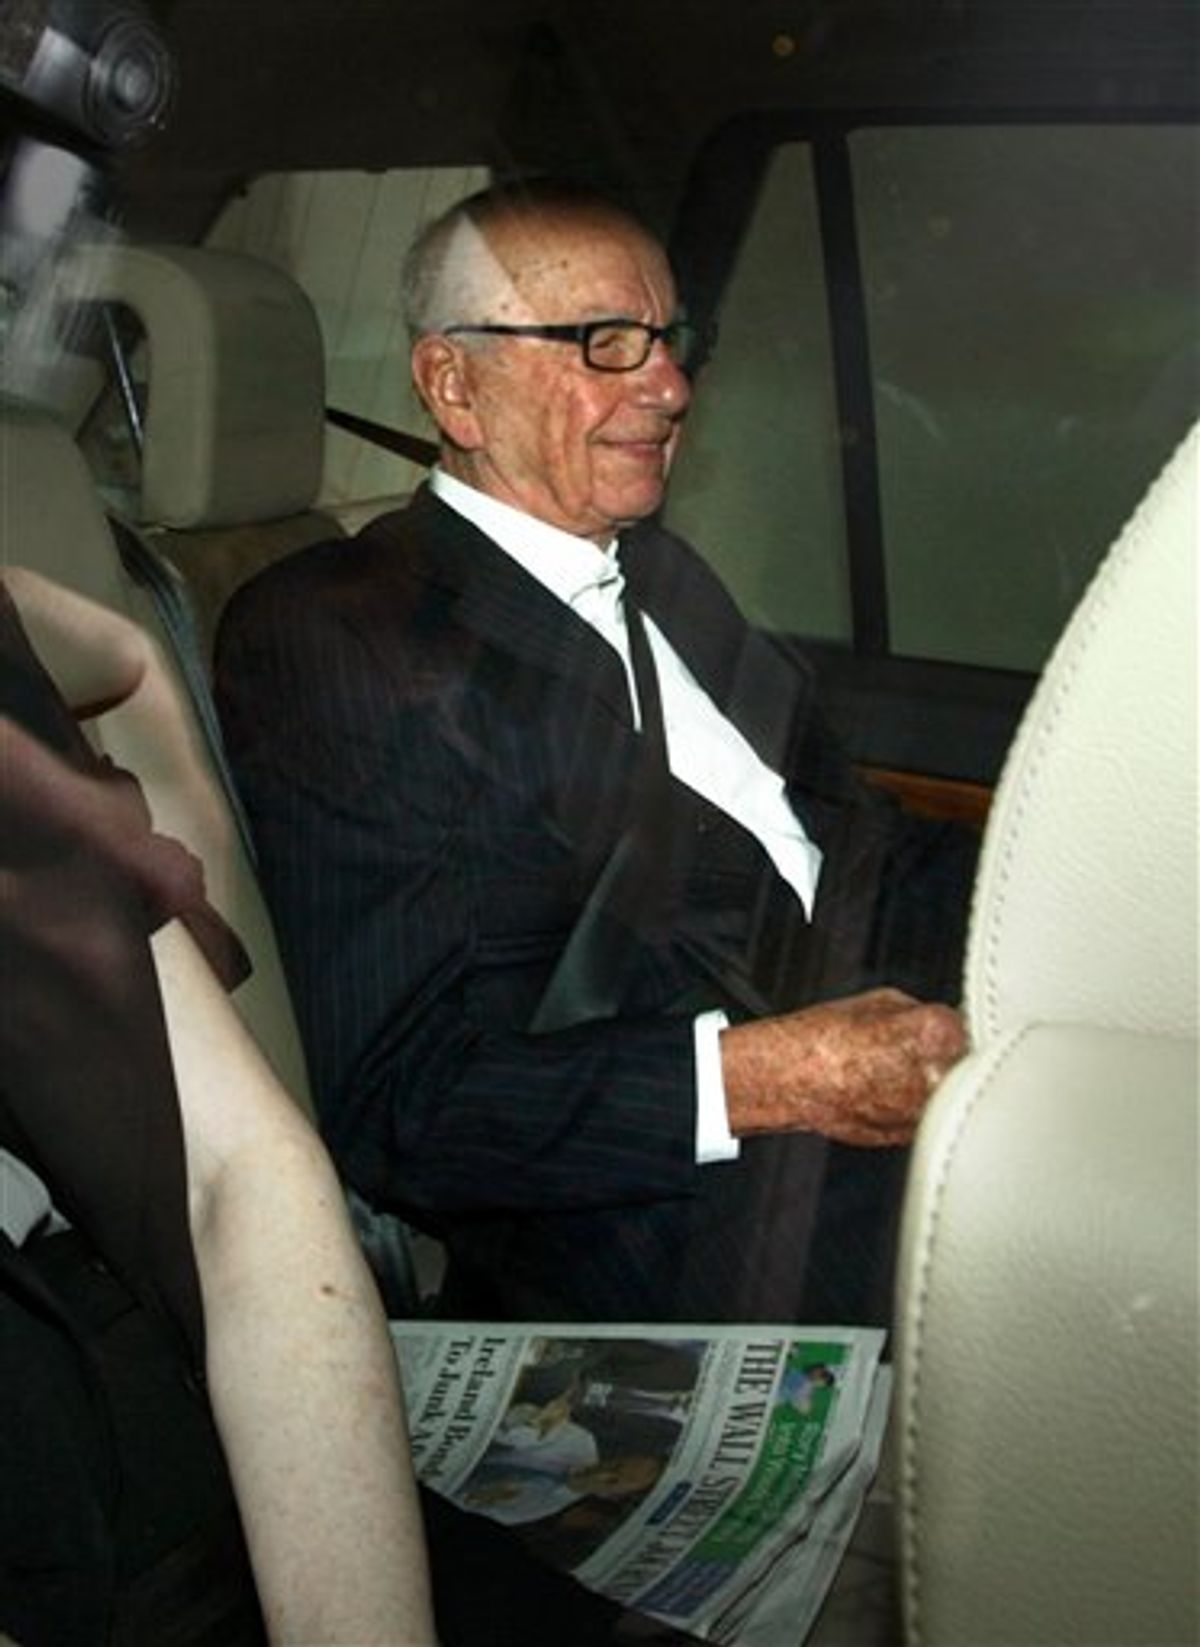 Rupert Murdoch leaves his home in Mayfair, London, as British Prime Minister David Cameron joined demands for the media mogul to drop his BSkyB takeover bid in the wake of the phone-hacking scandal Wednesday July 13, 2011. Britain's House of Commons is poised to demand that Rupert Murdoch give up on his ambition of taking over a lucrative broadcaster while a phone hacking scandal rages around his British newspaper holdings. Cameron has put his party's weight behind an opposition motion up for a vote Wednesday which declares that bidding for full control of British Sky Broadcasting would not be in the national interest. (AP Photo/Steve Parsons)  UNITED KINGDOM OUT NO SALES NO ARCHIVE (AP)